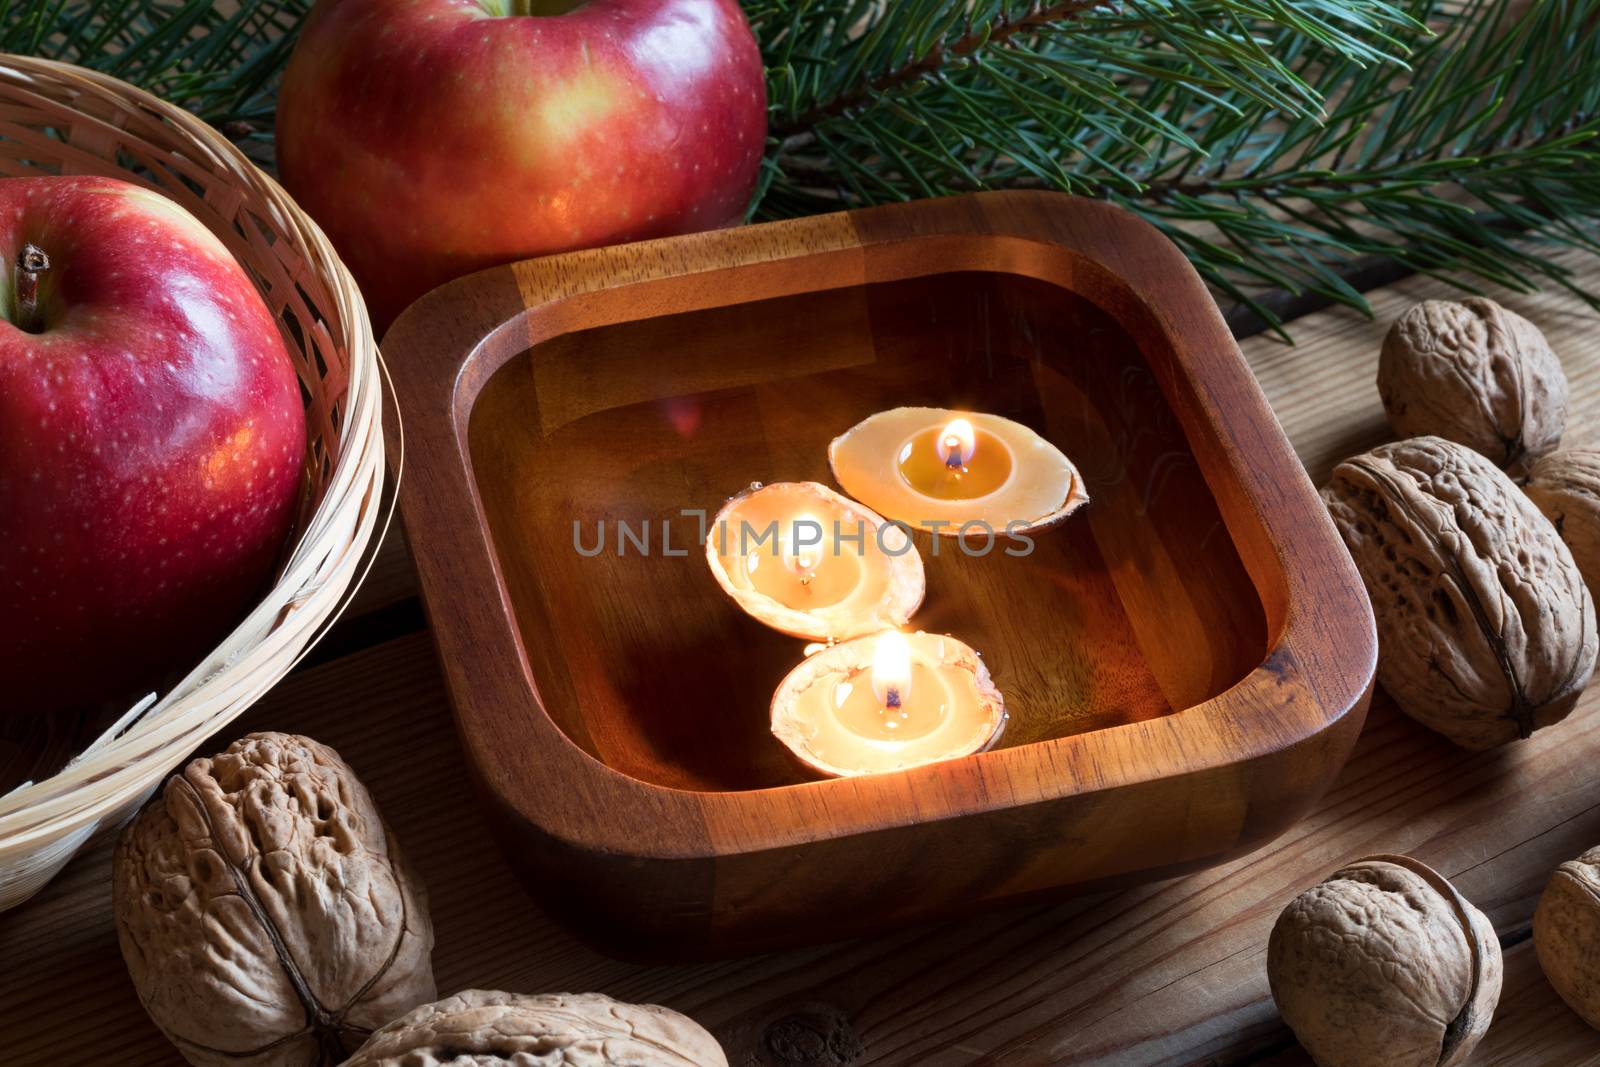 Christmas decoration - apples, pine branches, walnuts and floati by madeleine_steinbach